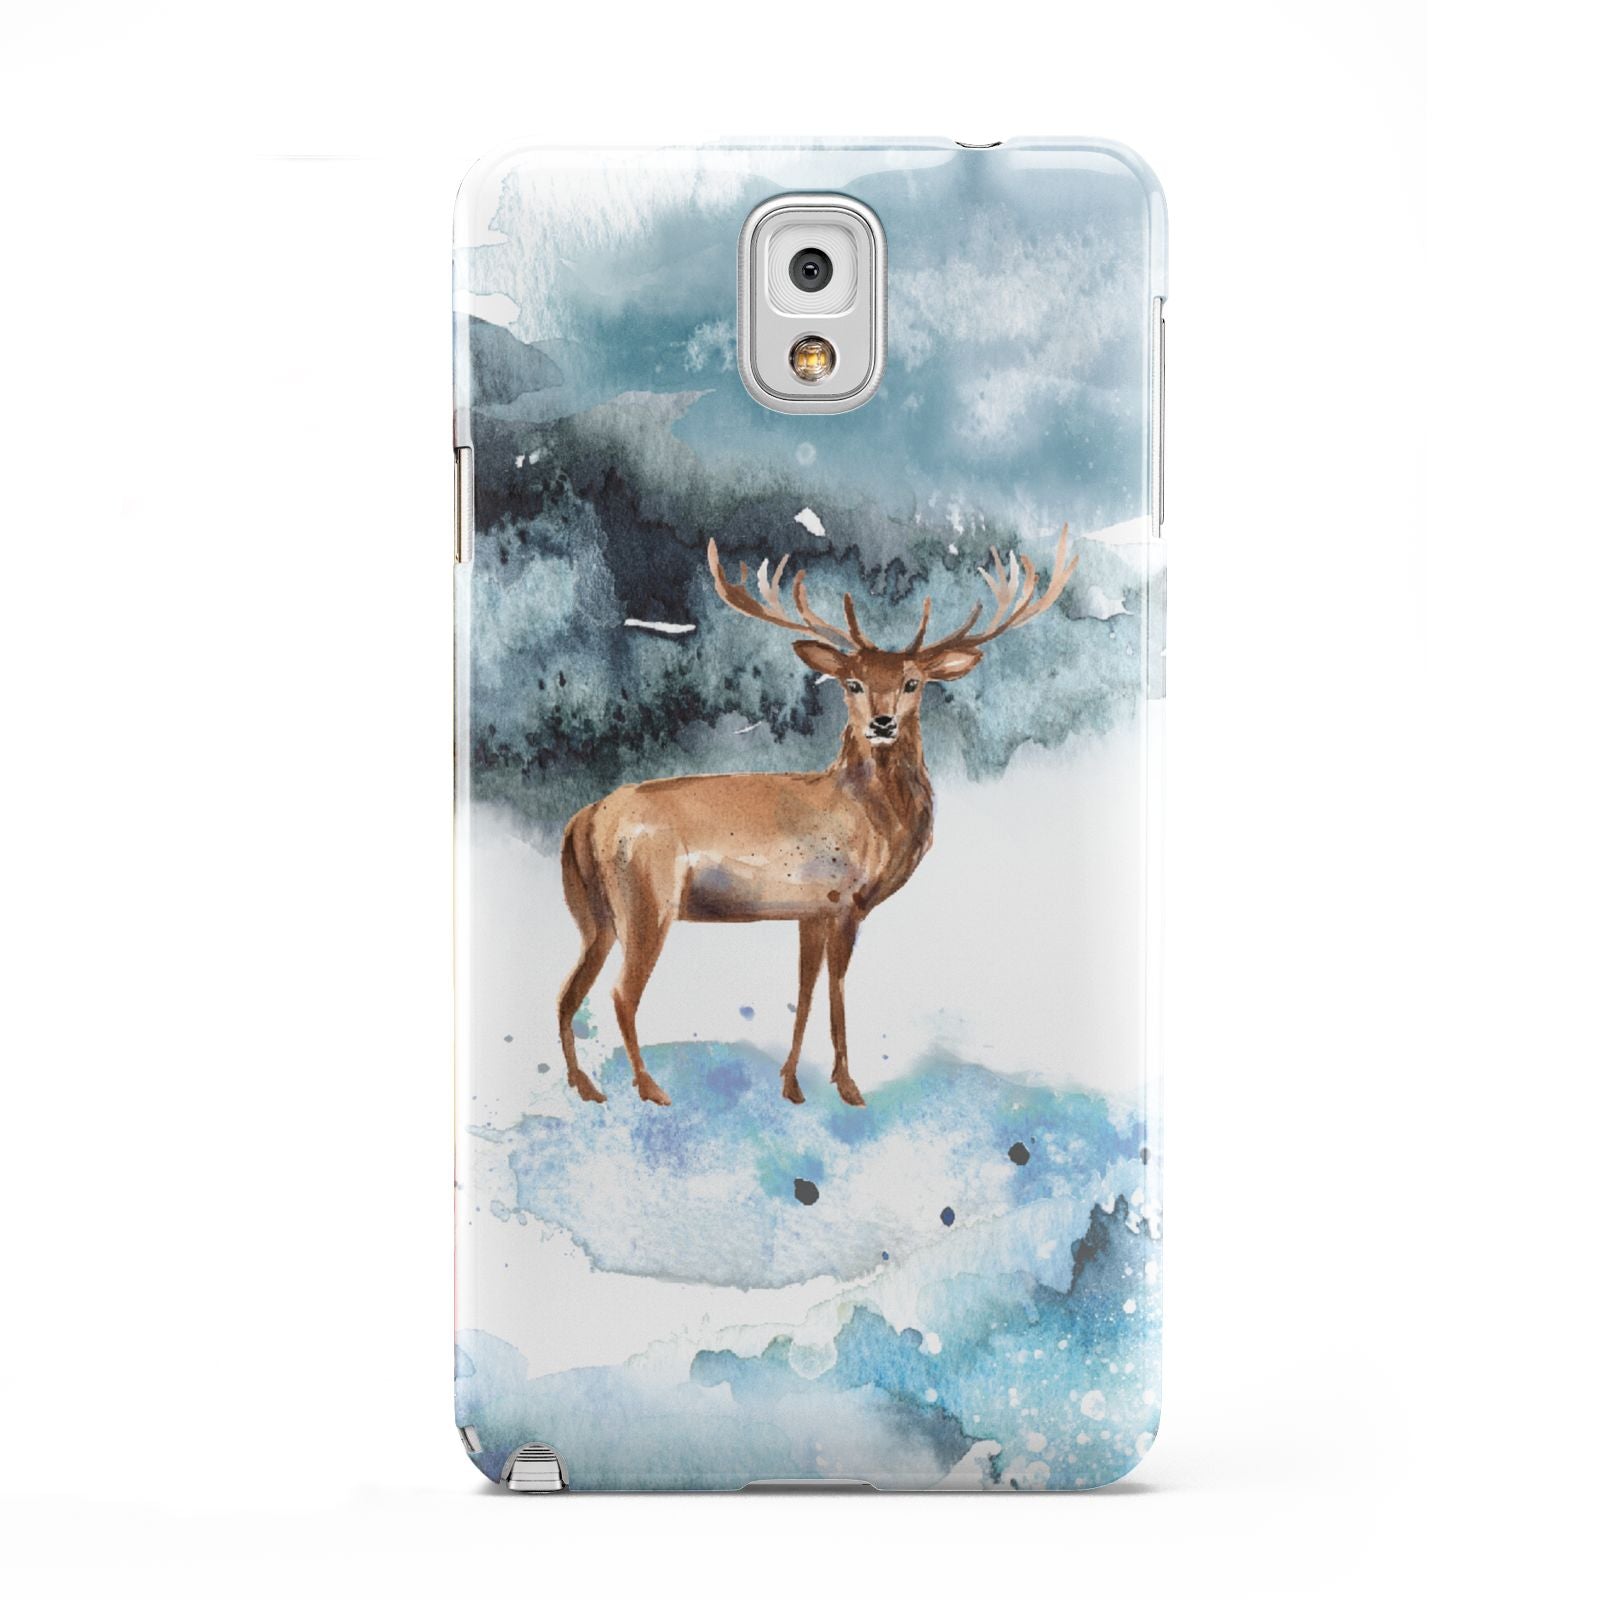 Christmas Winter Stag Samsung Galaxy Note 3 Case